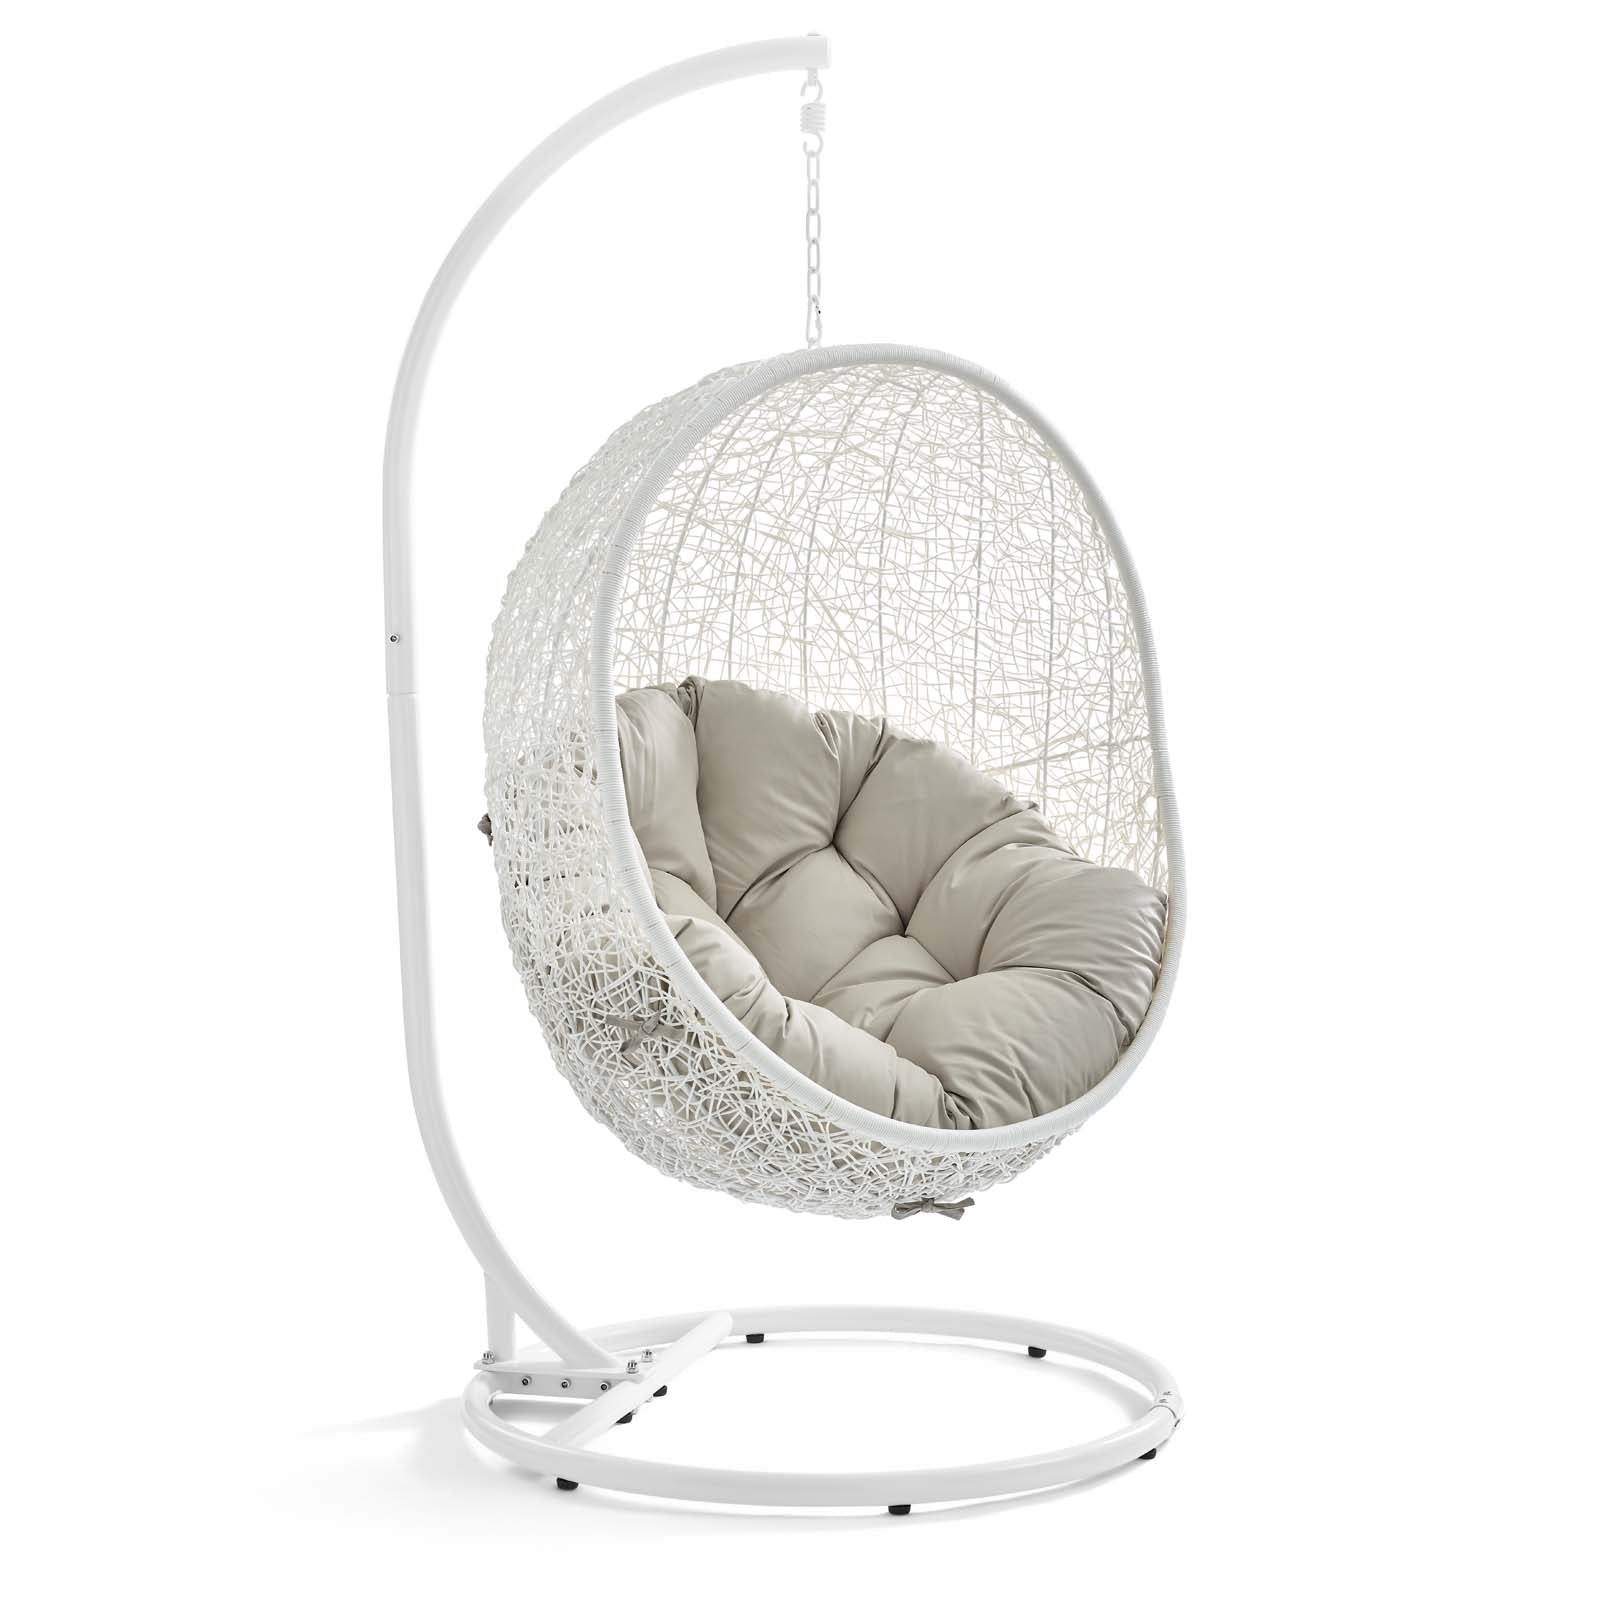 Modway Outdoor Swings - Hide Outdoor Patio Swing Chair With Stand White Beige